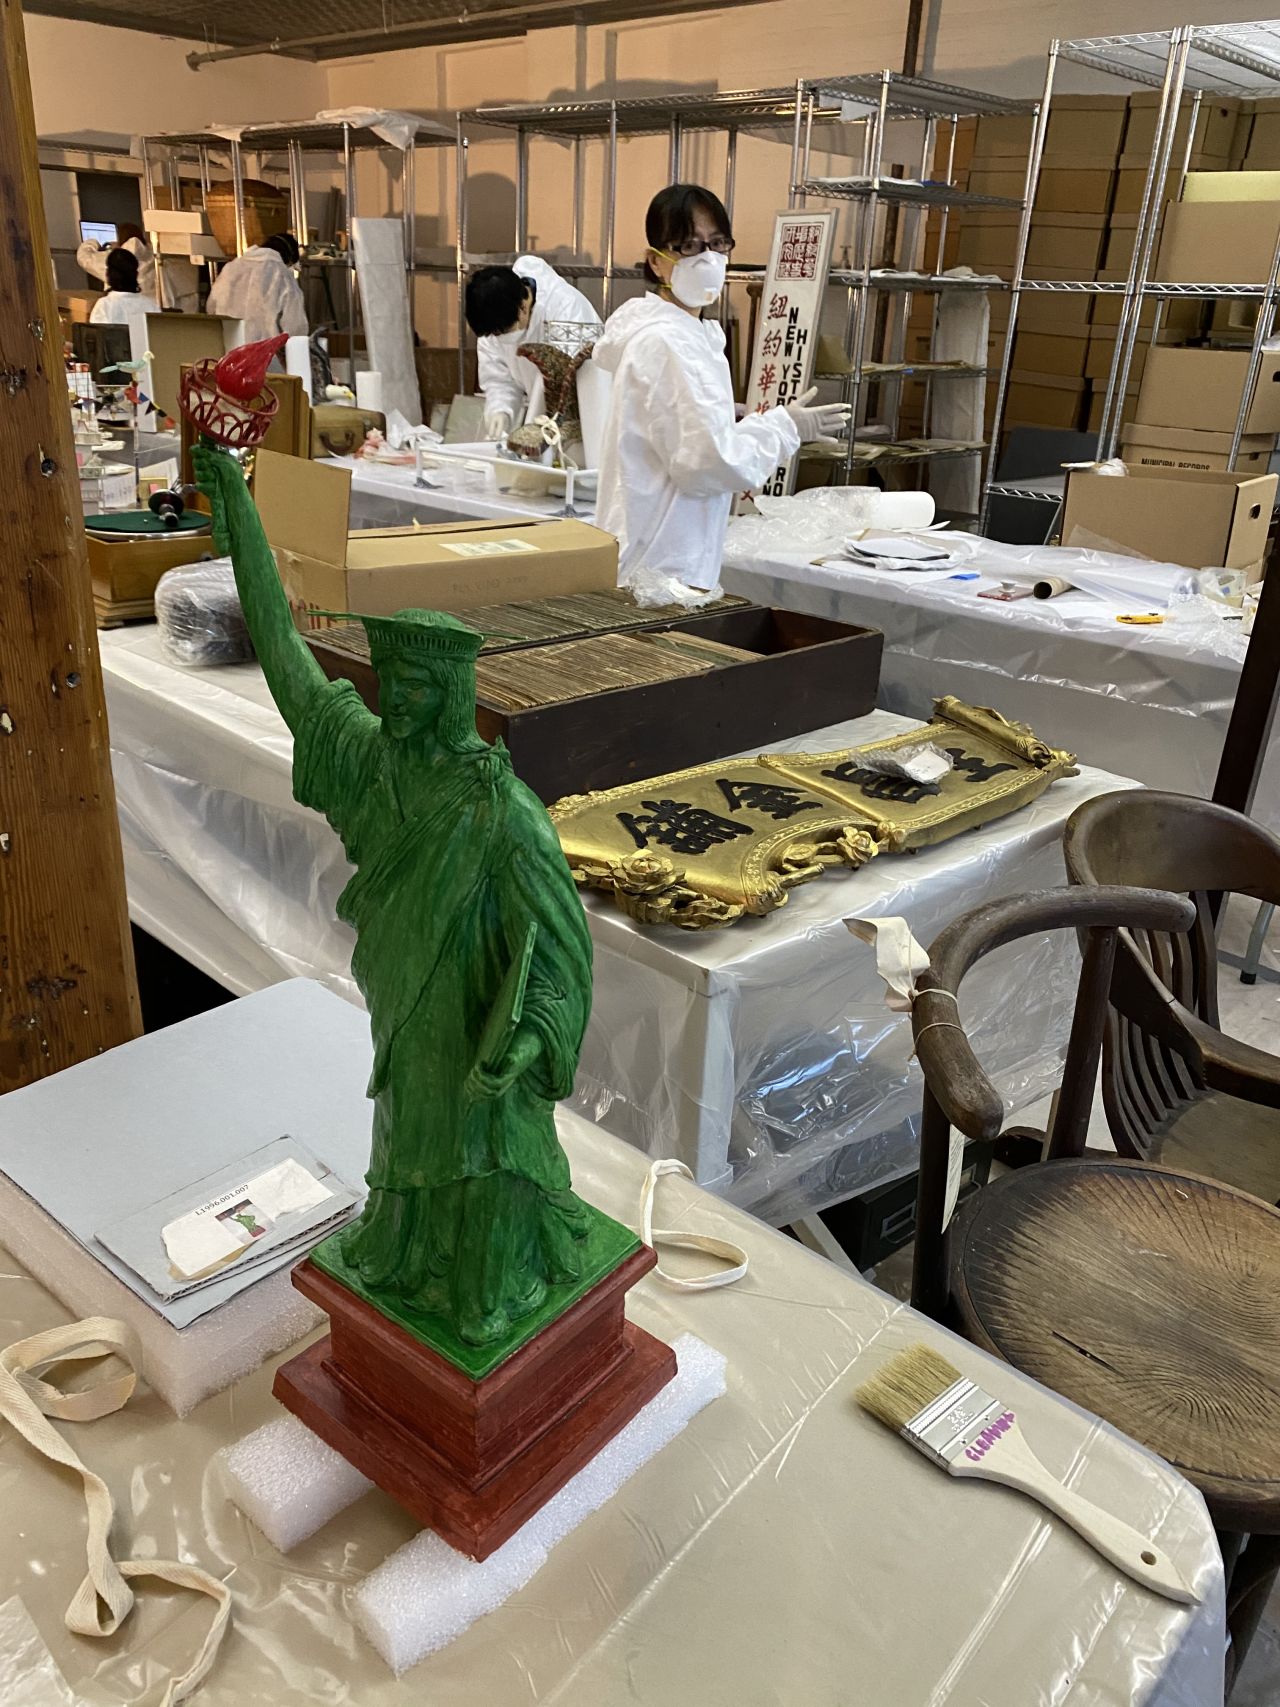 A paper sculpture of the Statue of Liberty from MOCA's "Fly to Freedom" collection of paper art made by undocumented immigrants from China while in detention in the U.S., and other rescued items from MOCA's archives being restored in February 2020.